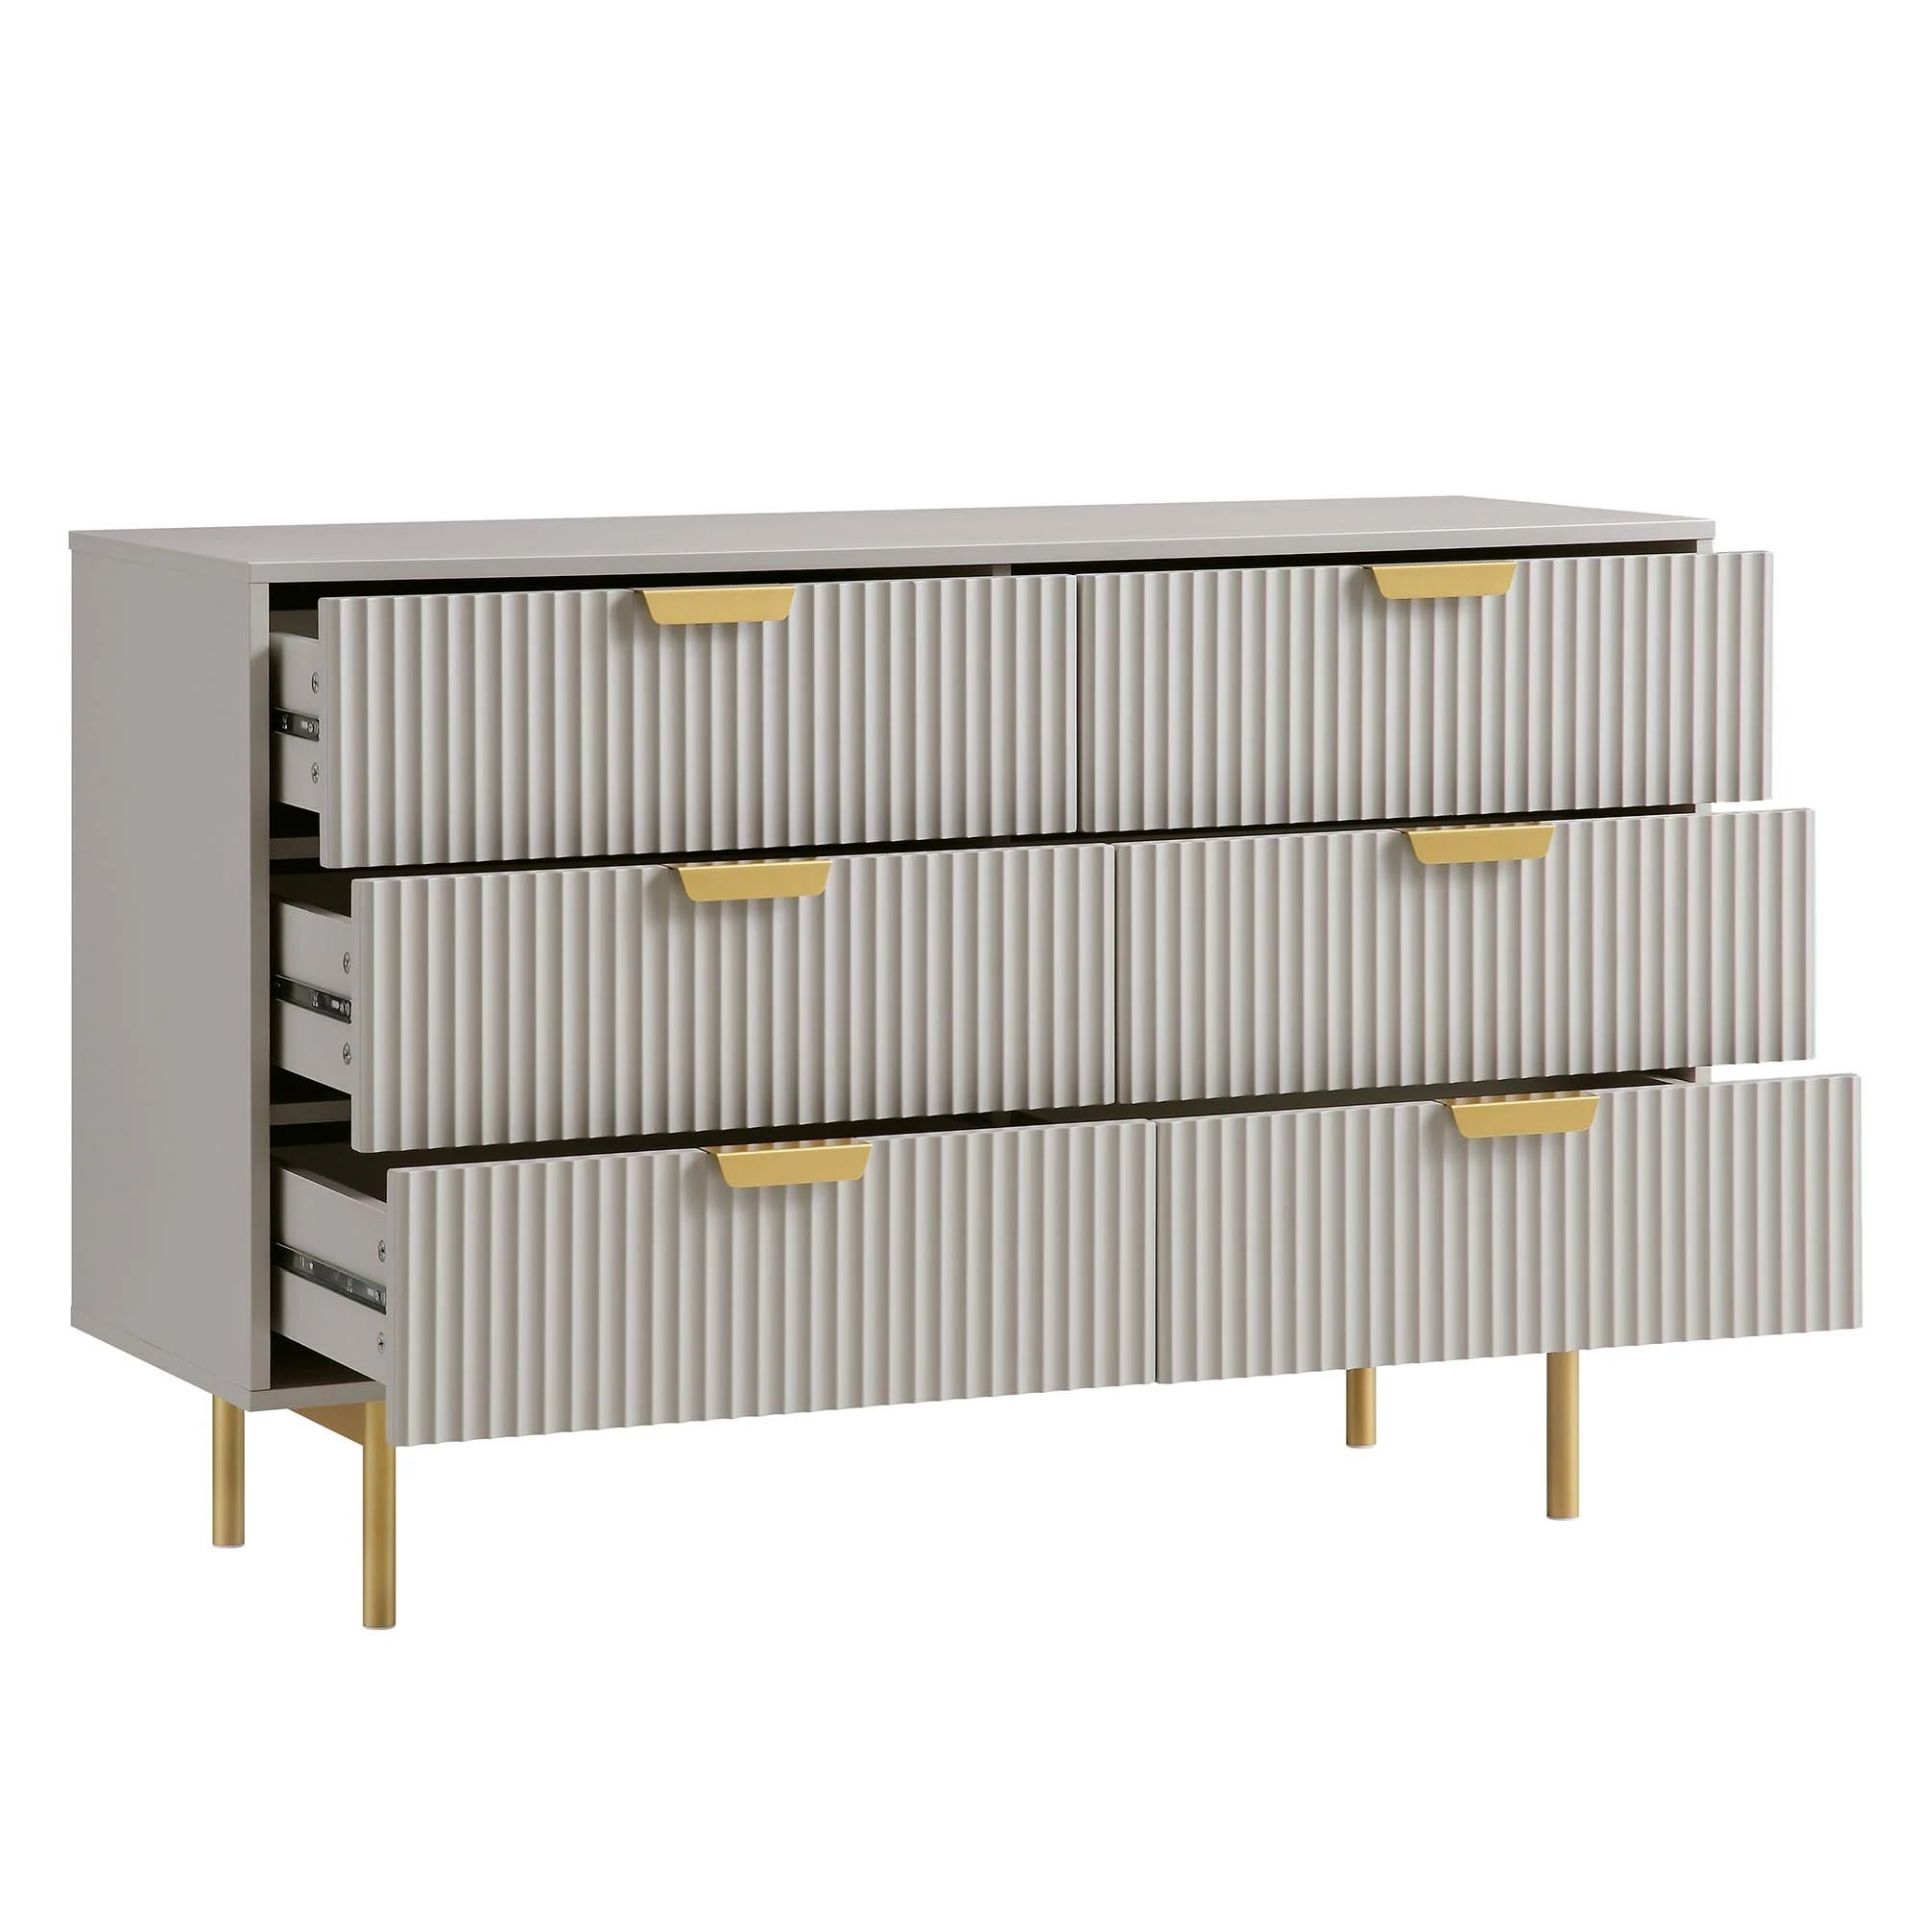 Richmond Ridged Wide Chest of 6 Drawers, Matte Taupe. - R14. RRP £419.99. Our Richmond cabinet - Image 2 of 2